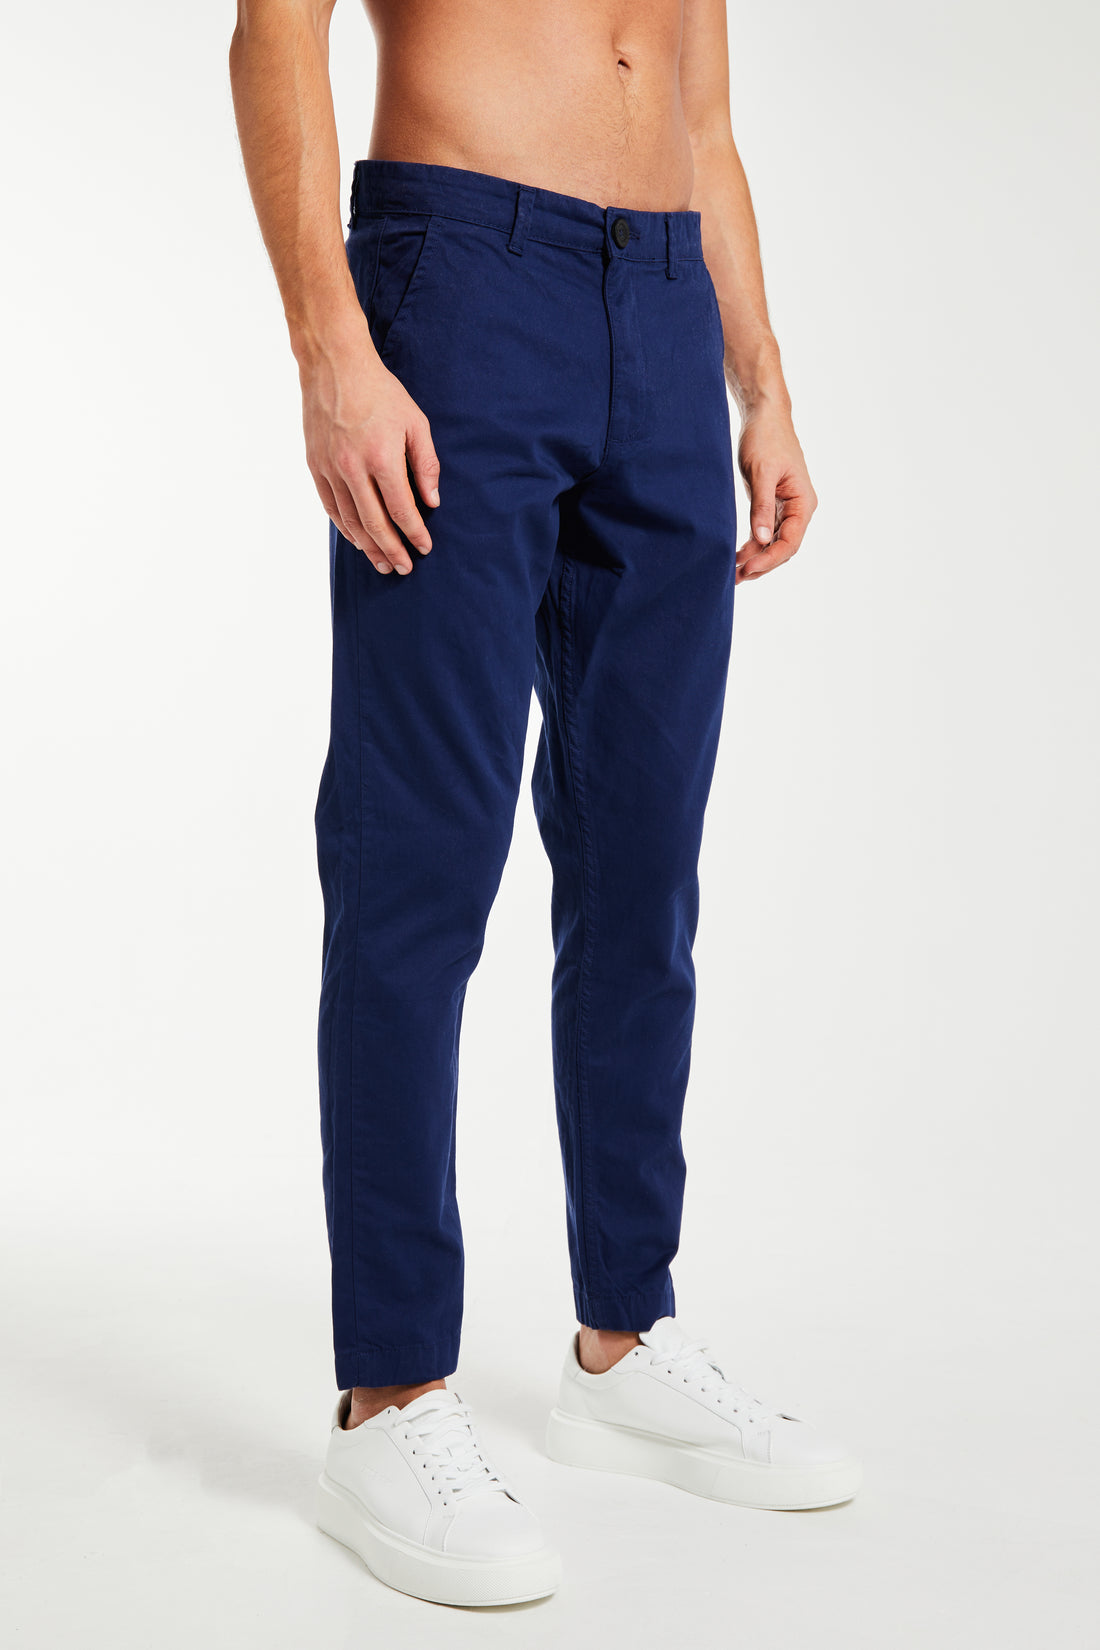 Navy blue cheap men's chinos that are straight legged